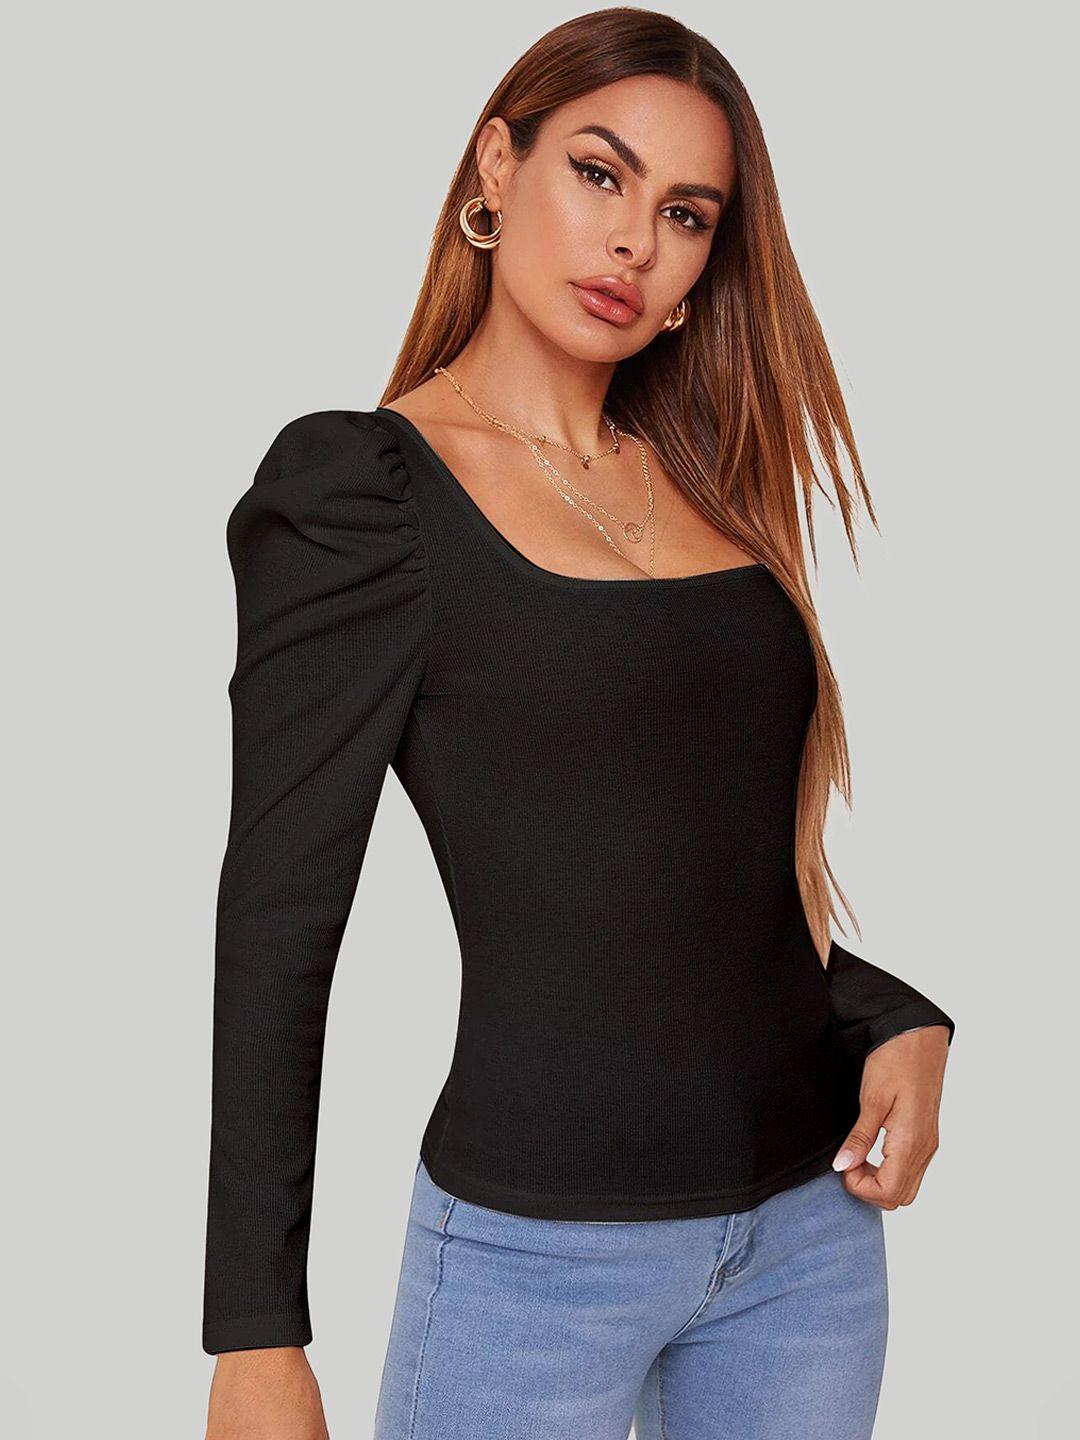 lee-tex-square-neck-full-sleeve-crepe-top